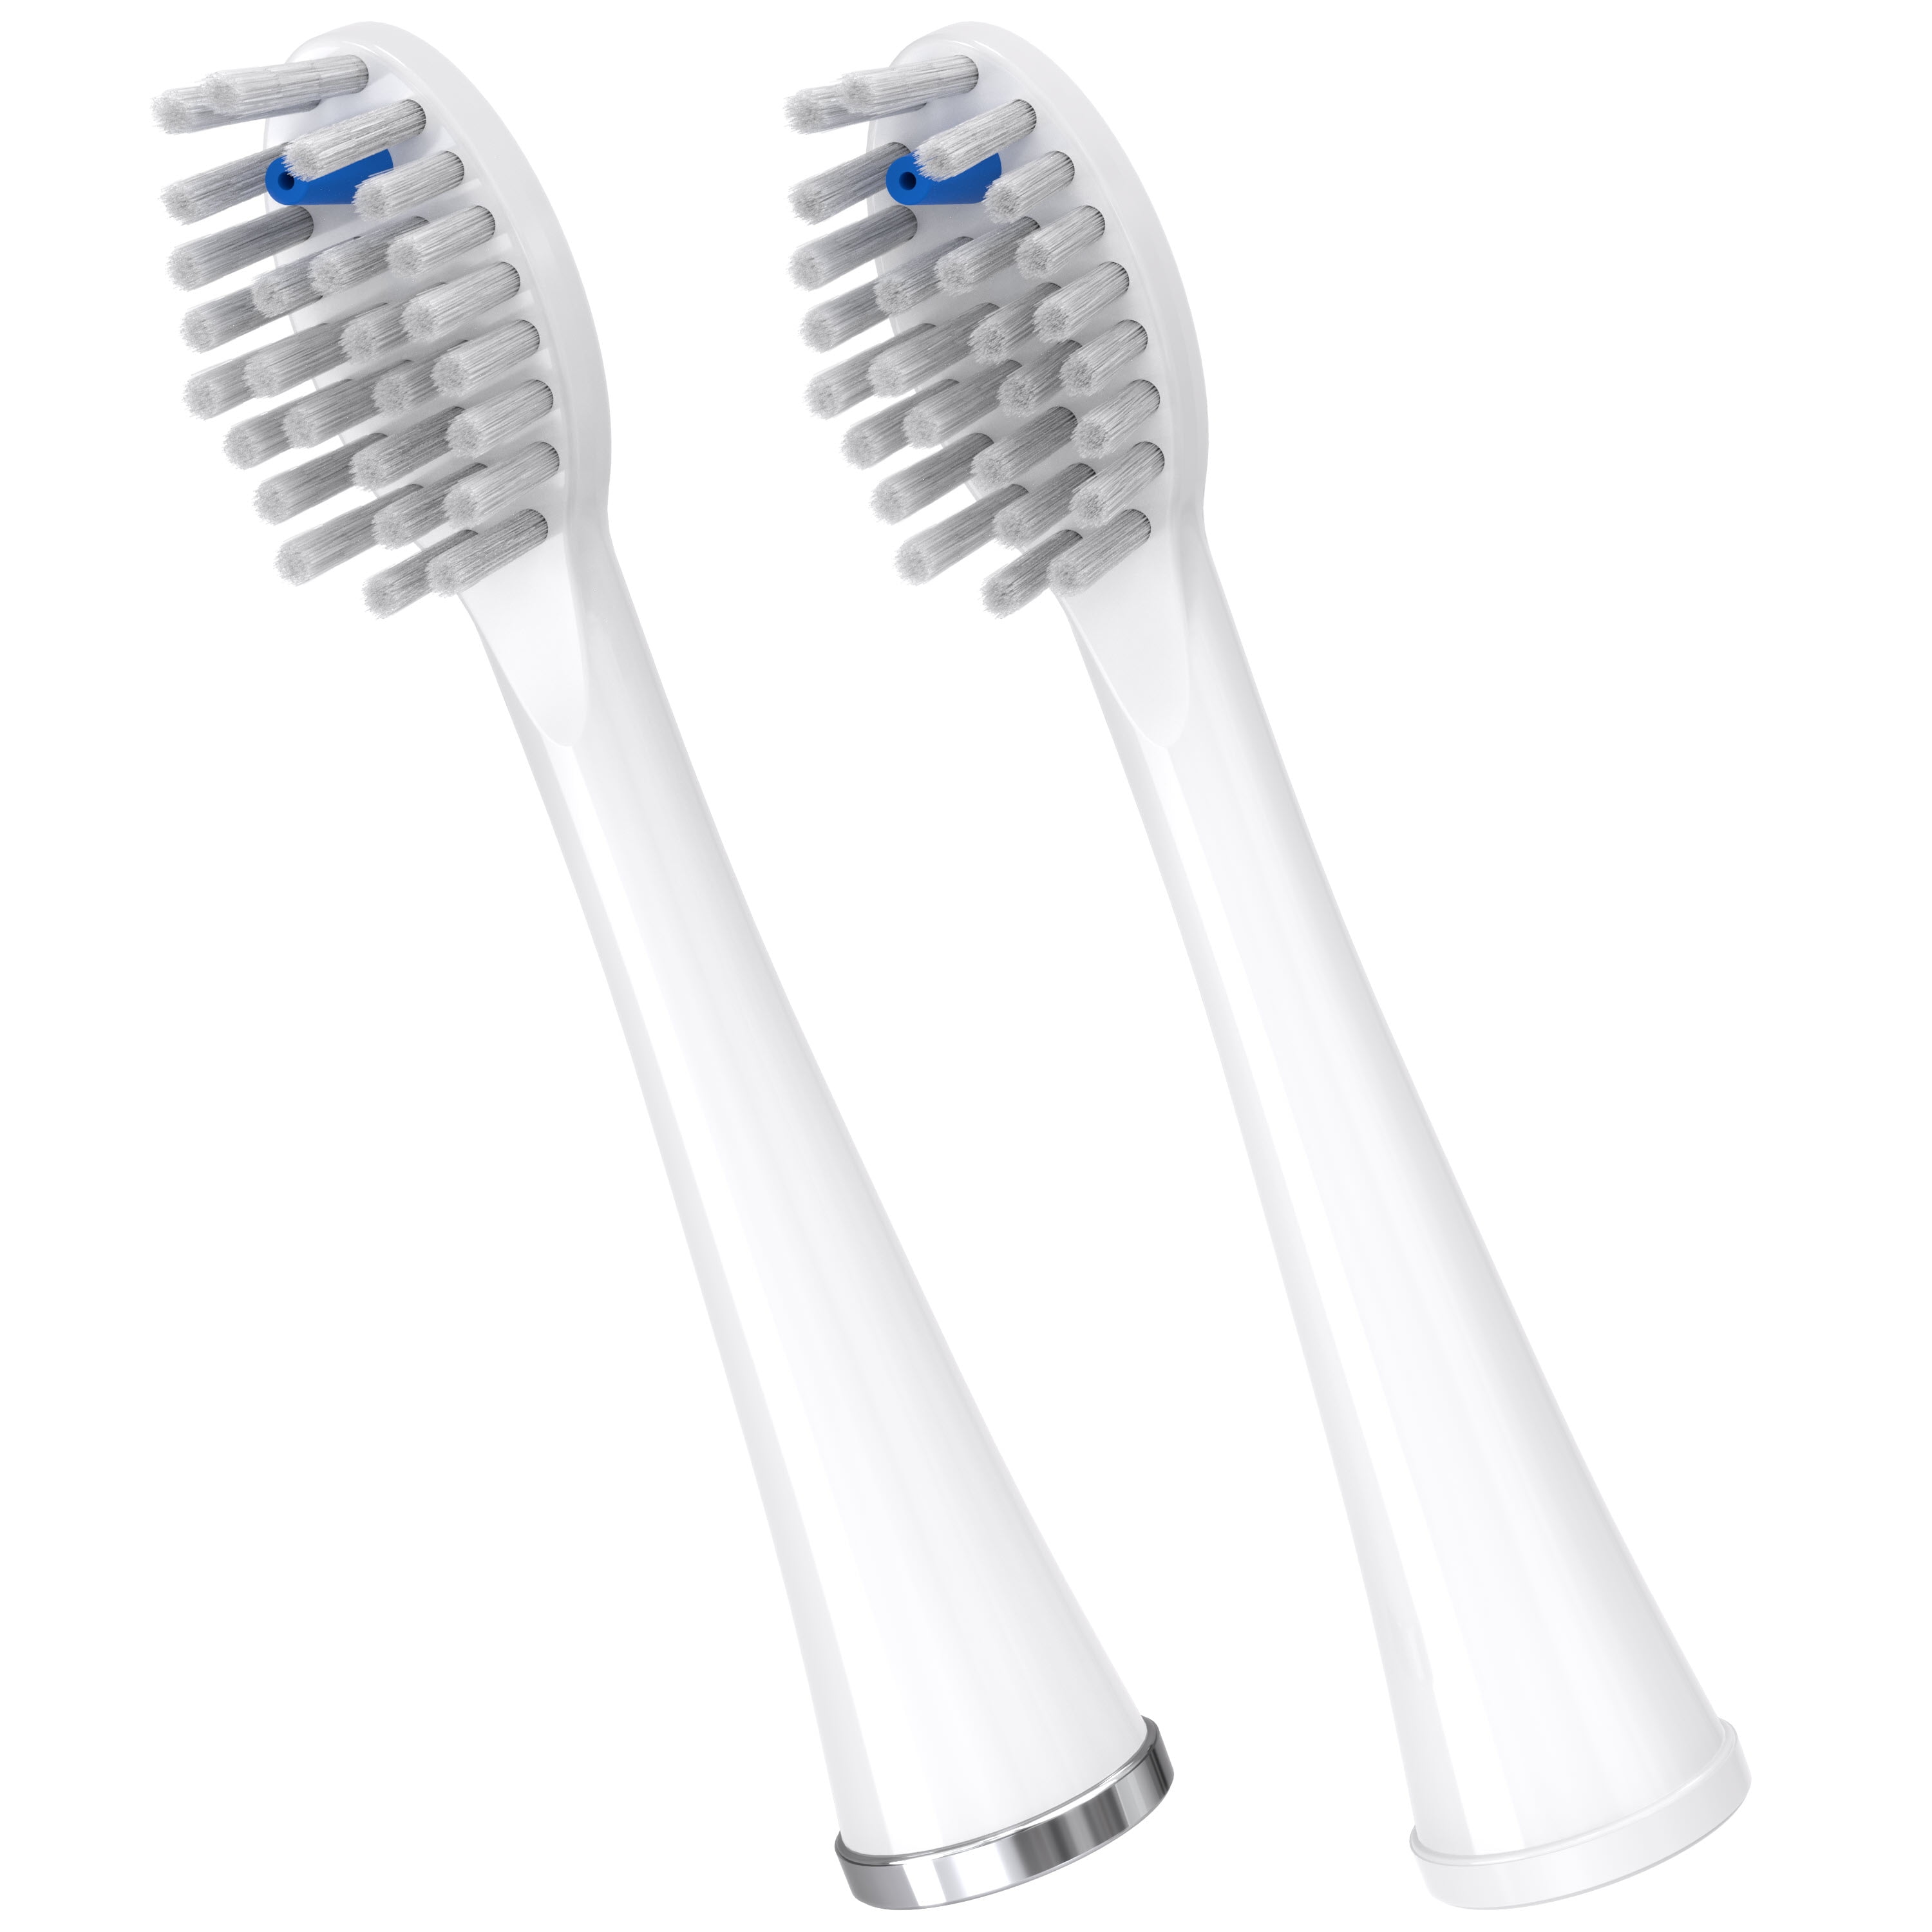 Waterpik Triple Sonic Electric Toothbrush Replacement Heads STRB 